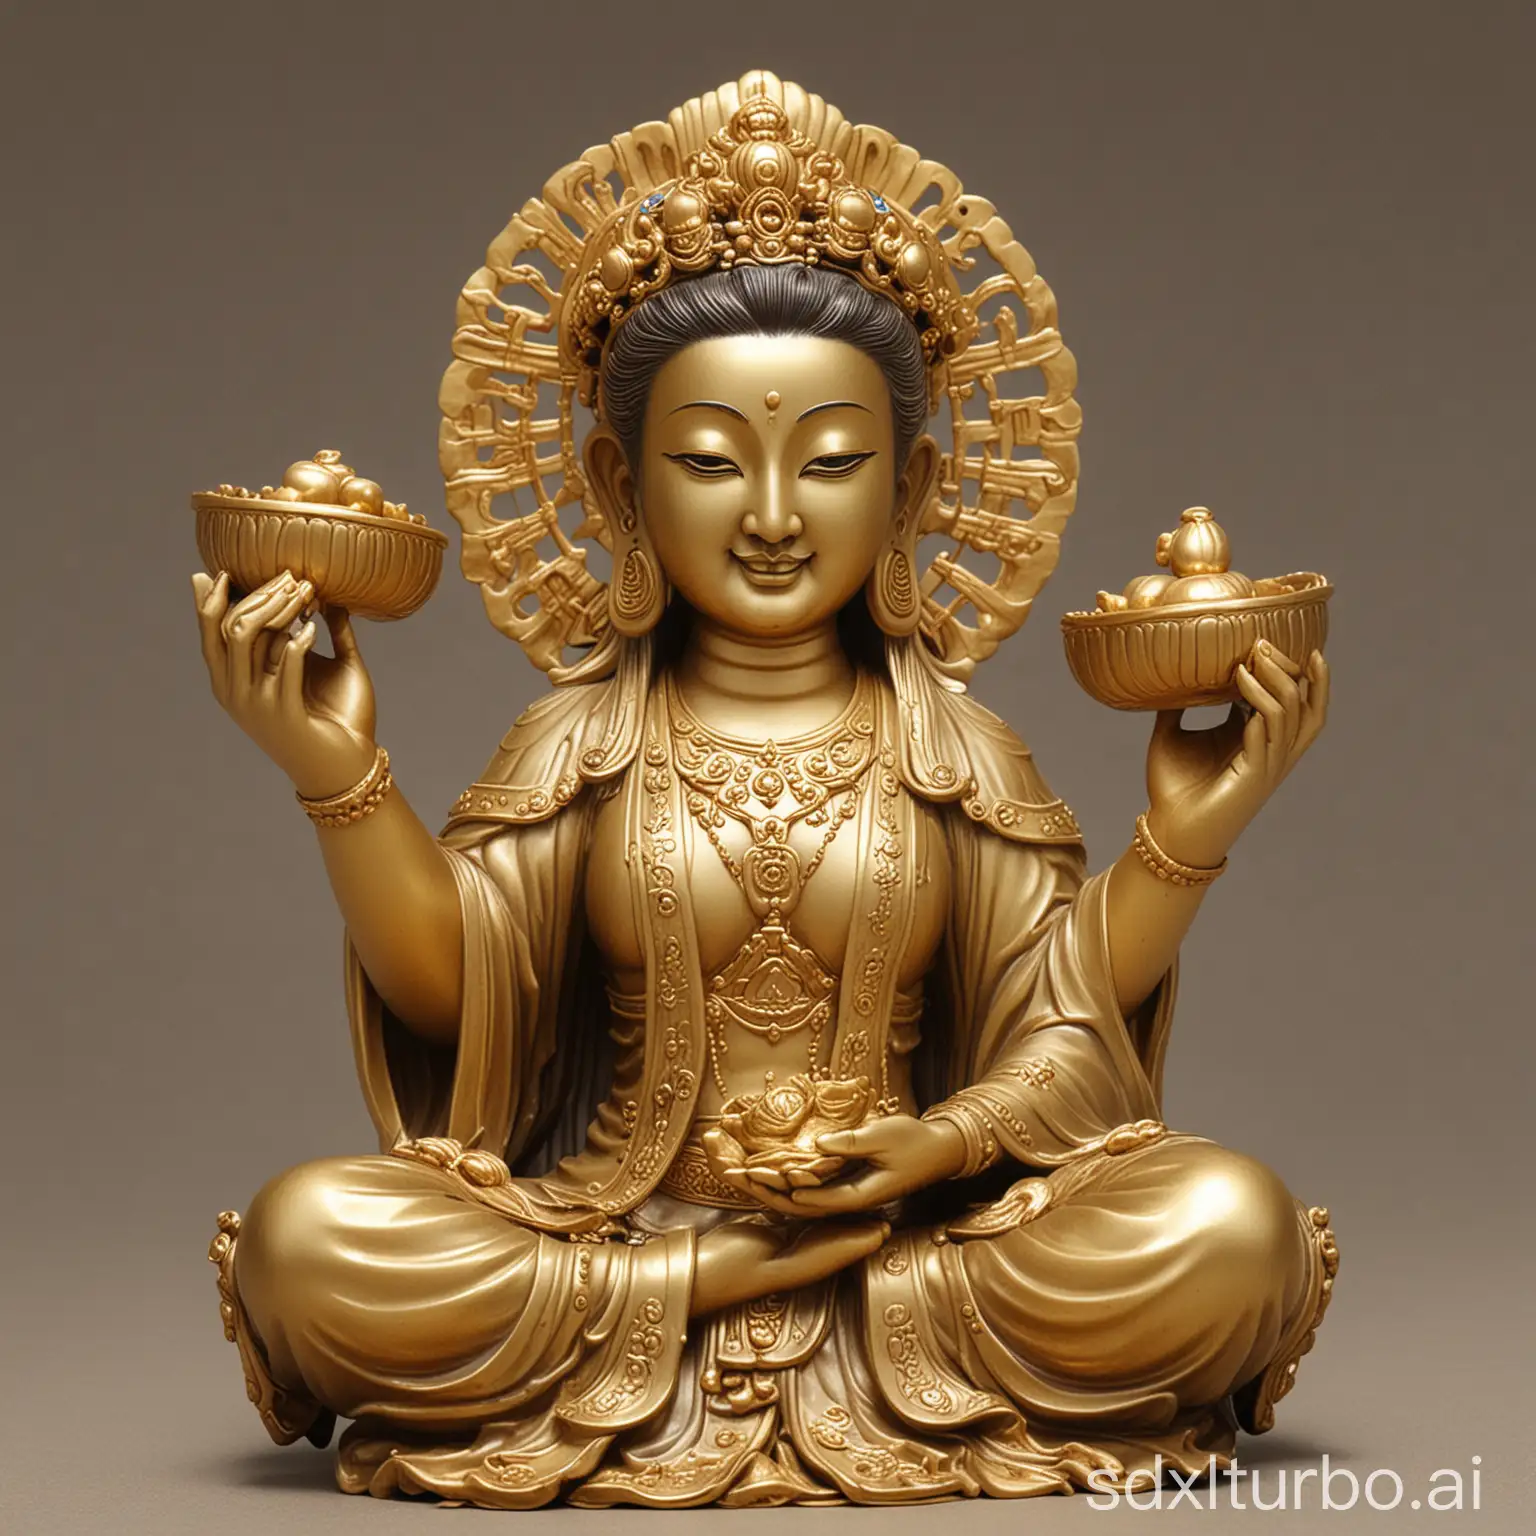 Guanyin Bodhisattva holds a gold ingot with both hands, with a benevolent face, big smiling eyes, large ears hanging down, a bit solemn, and exquisite facial features.